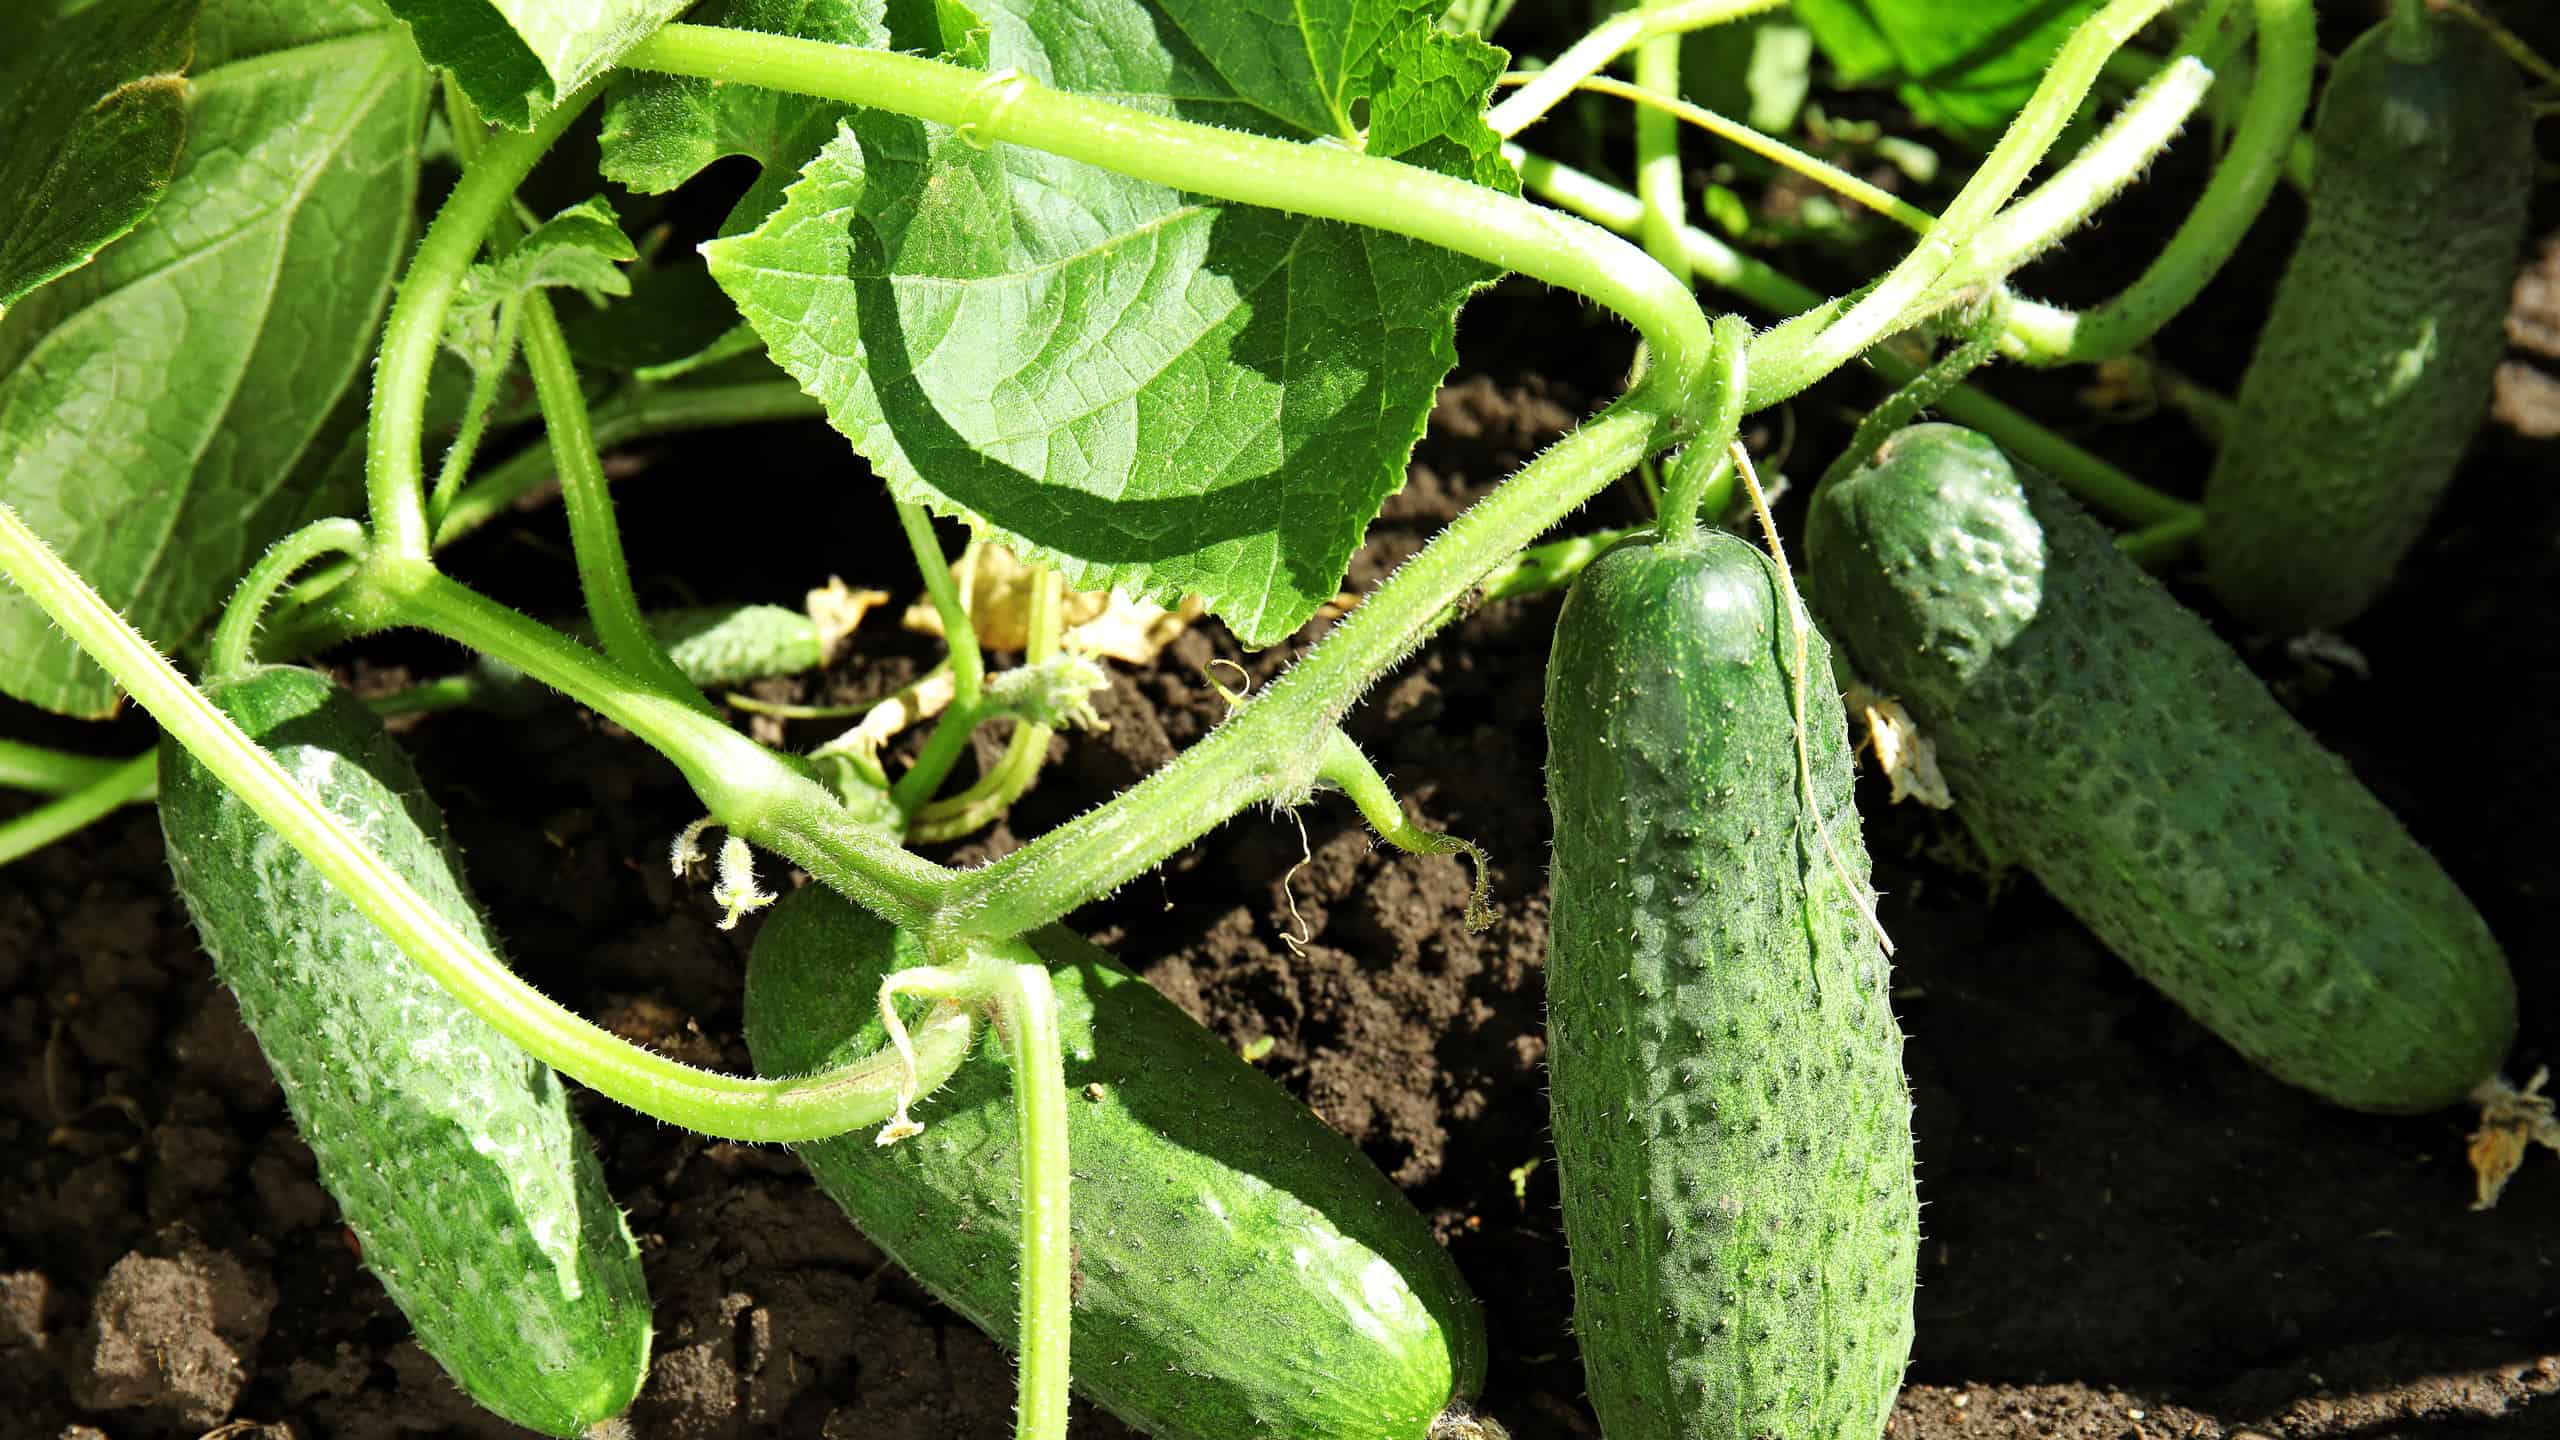 Green plant with ripe cucumbers in garden on sunny day